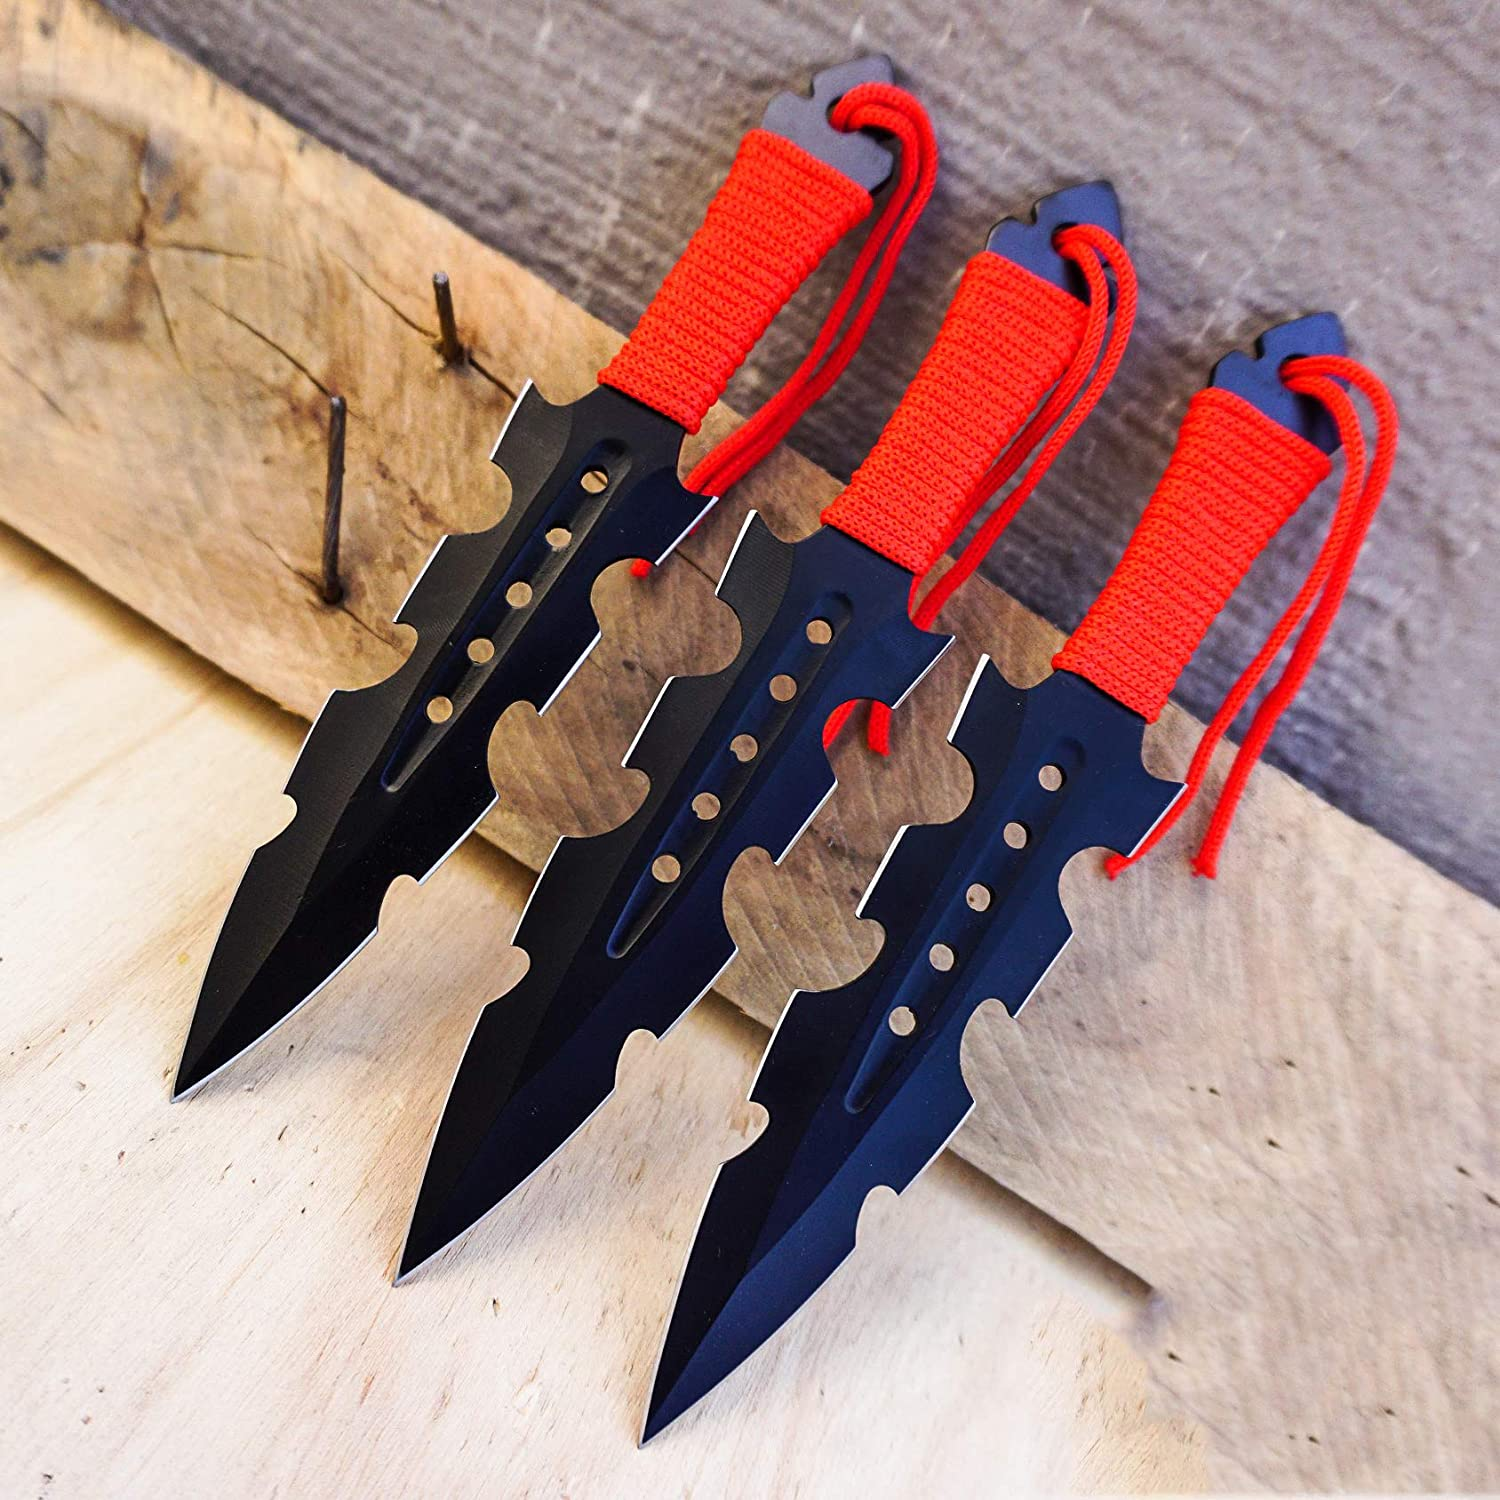 Tactical Knife Survival Knife Hunting Knife 7.5" Ripper Throwing Knives Set Fixed Blade Knife Razor Sharp Edge Camping Accessories Survival Kit Tactical Gear